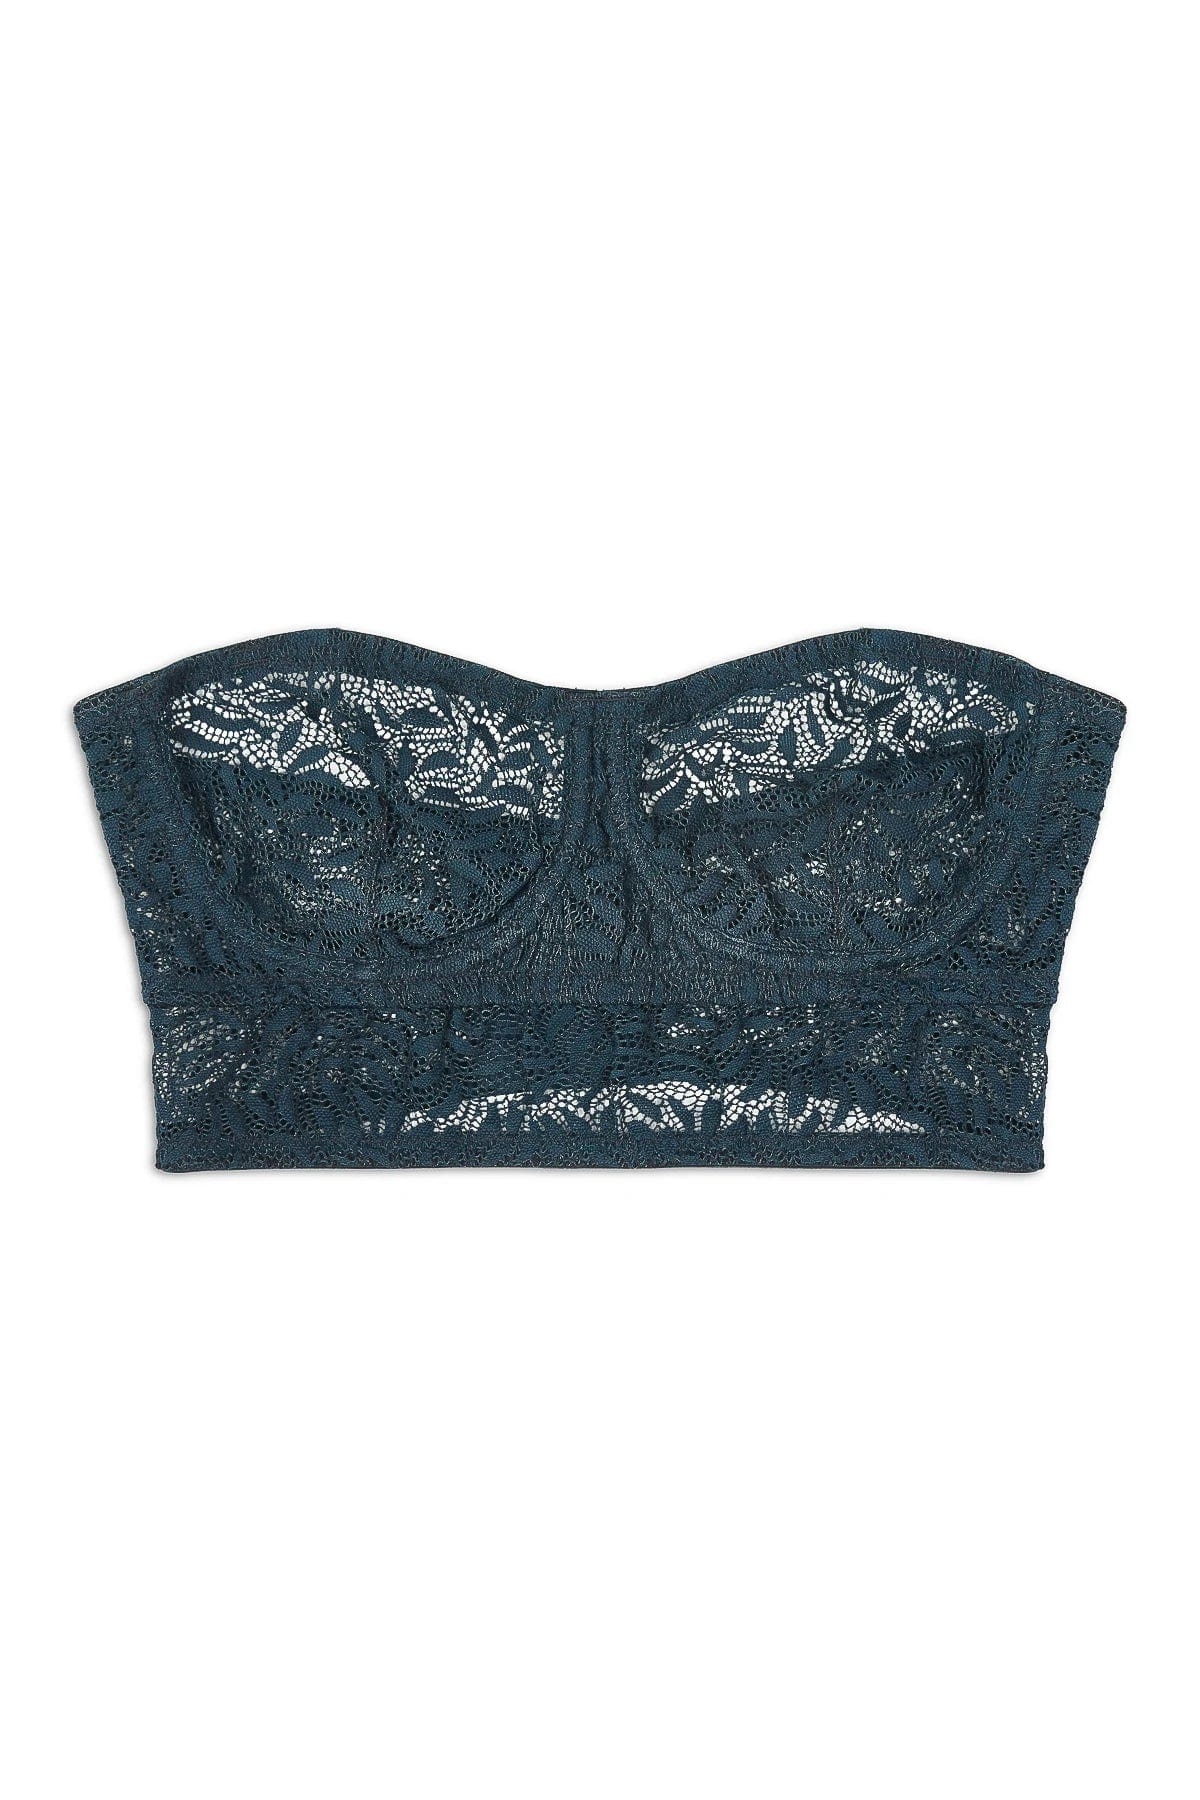 Else Lingerie French Navy / 36 C Acacia Underwire Longline Strapless Bra - French Navy